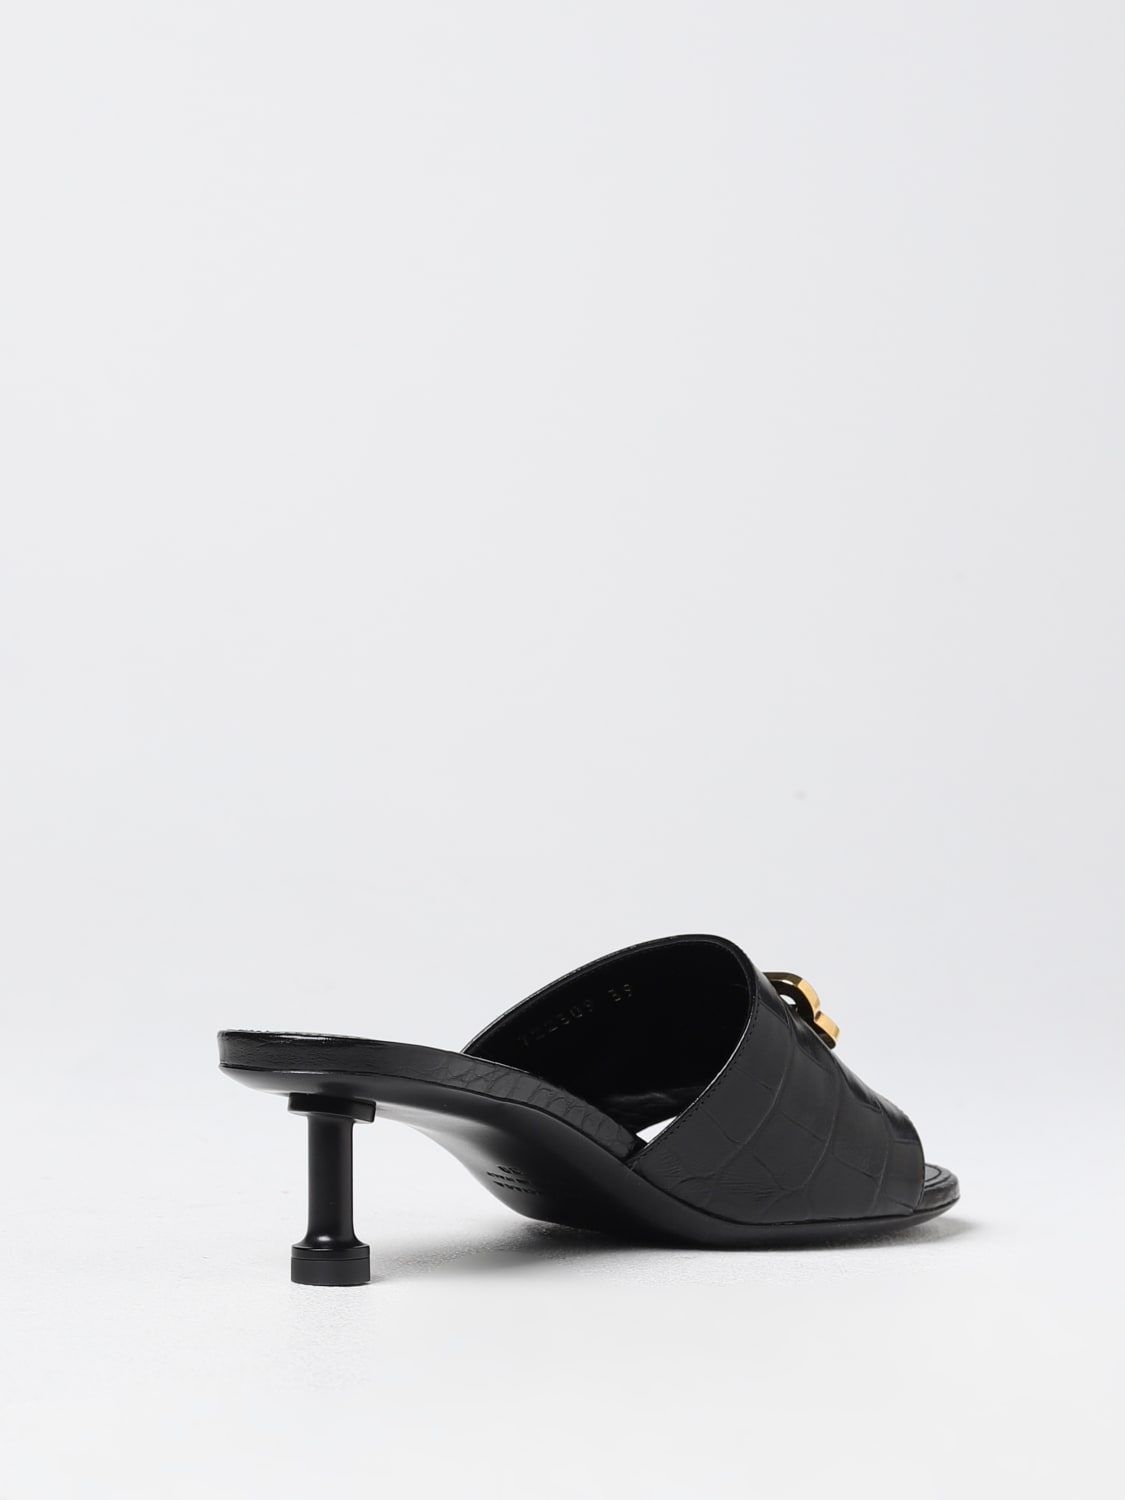 BALENCIAGA: Groupie Mules in crocodile print leather - Black | heeled sandals 722309WBED1 online on GIGLIO.COM